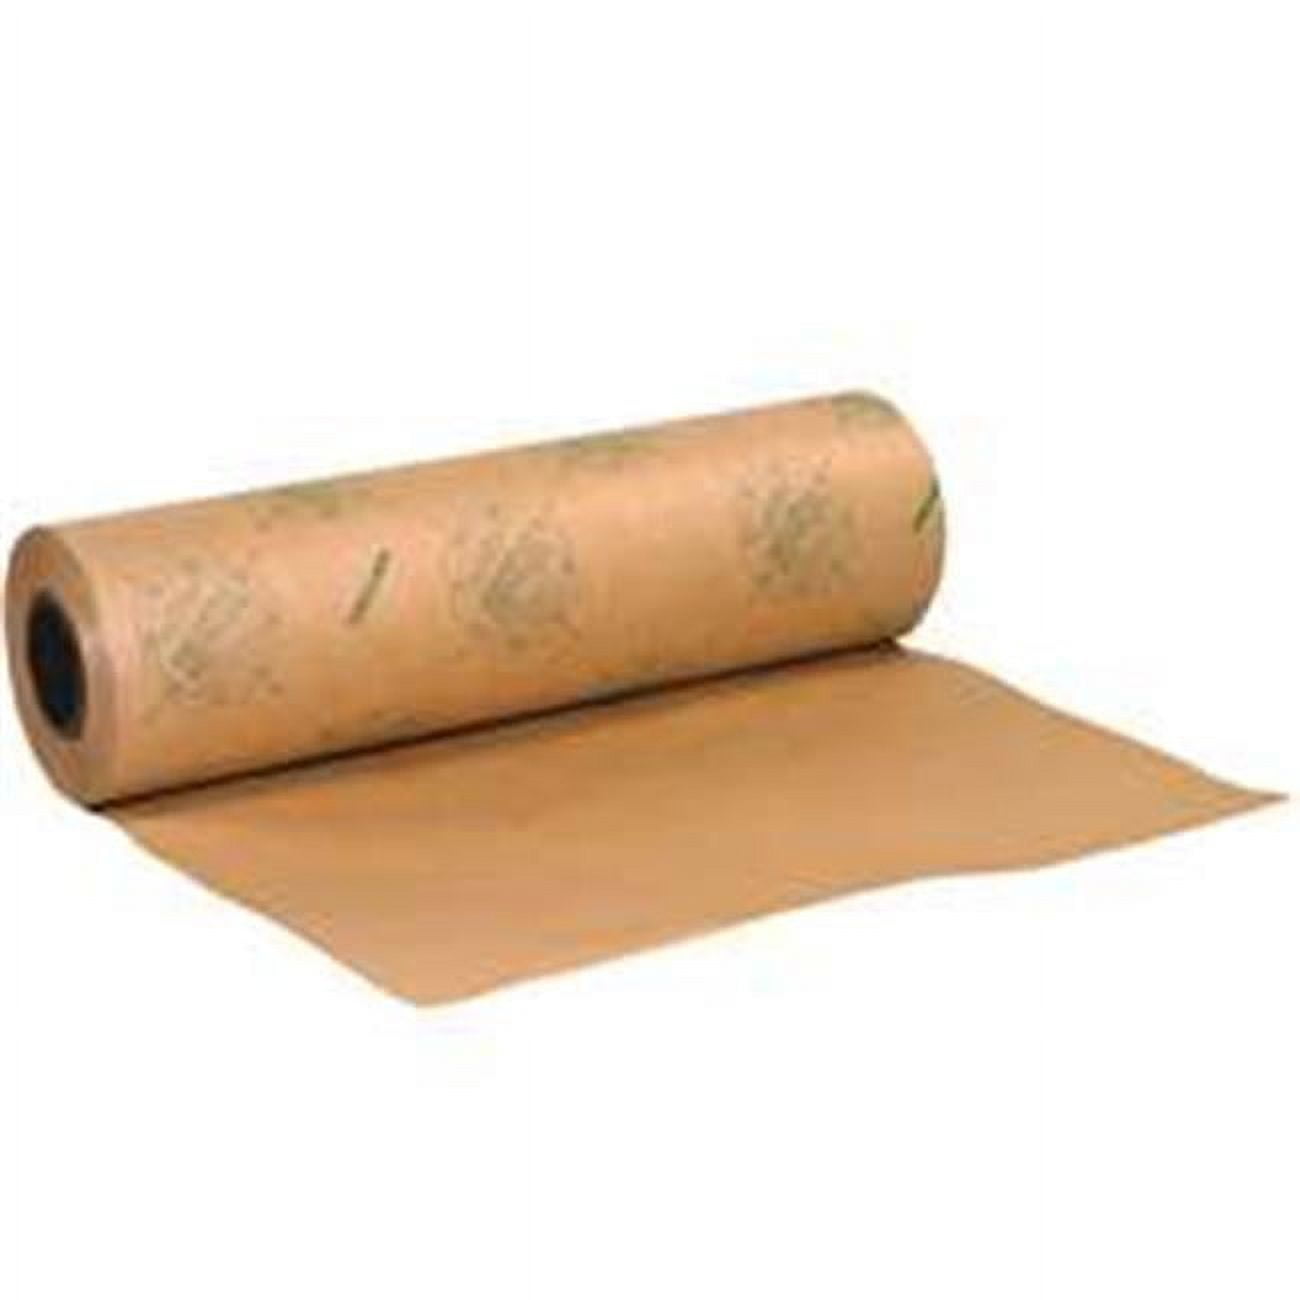 Brown Paper Roll 15×400, Brown Wrapping Paper, Wrapping Paper, Craft  Paper, Packing Paper for Moving, Packing, Gift Wrapping, Wall Art, Table